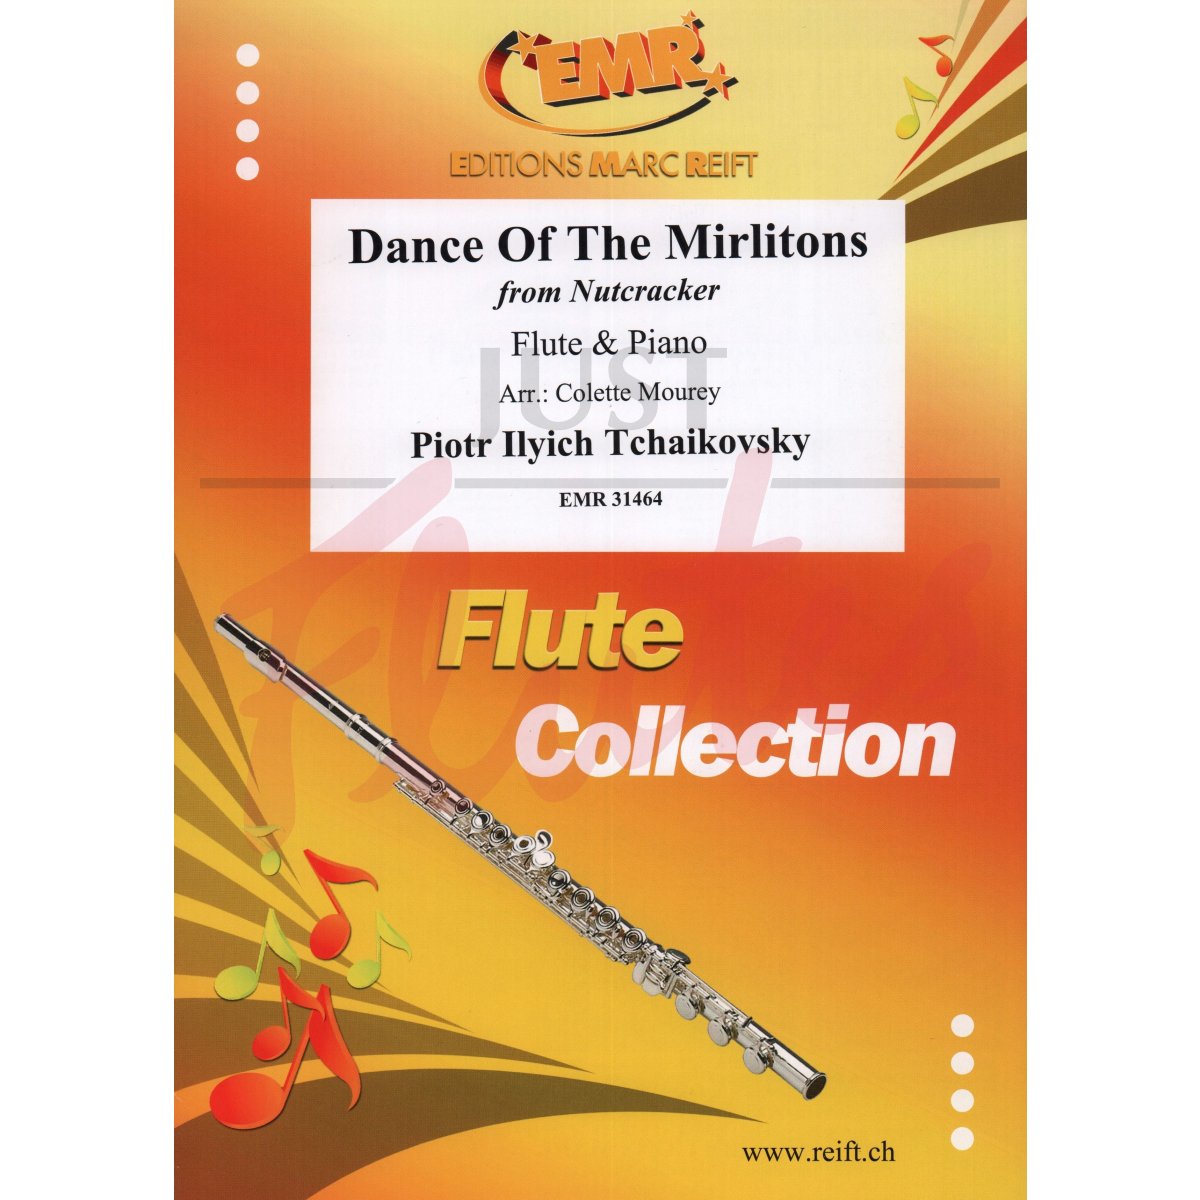 Dance of the Mirlitons from The Nutcracker for Flute and Piano